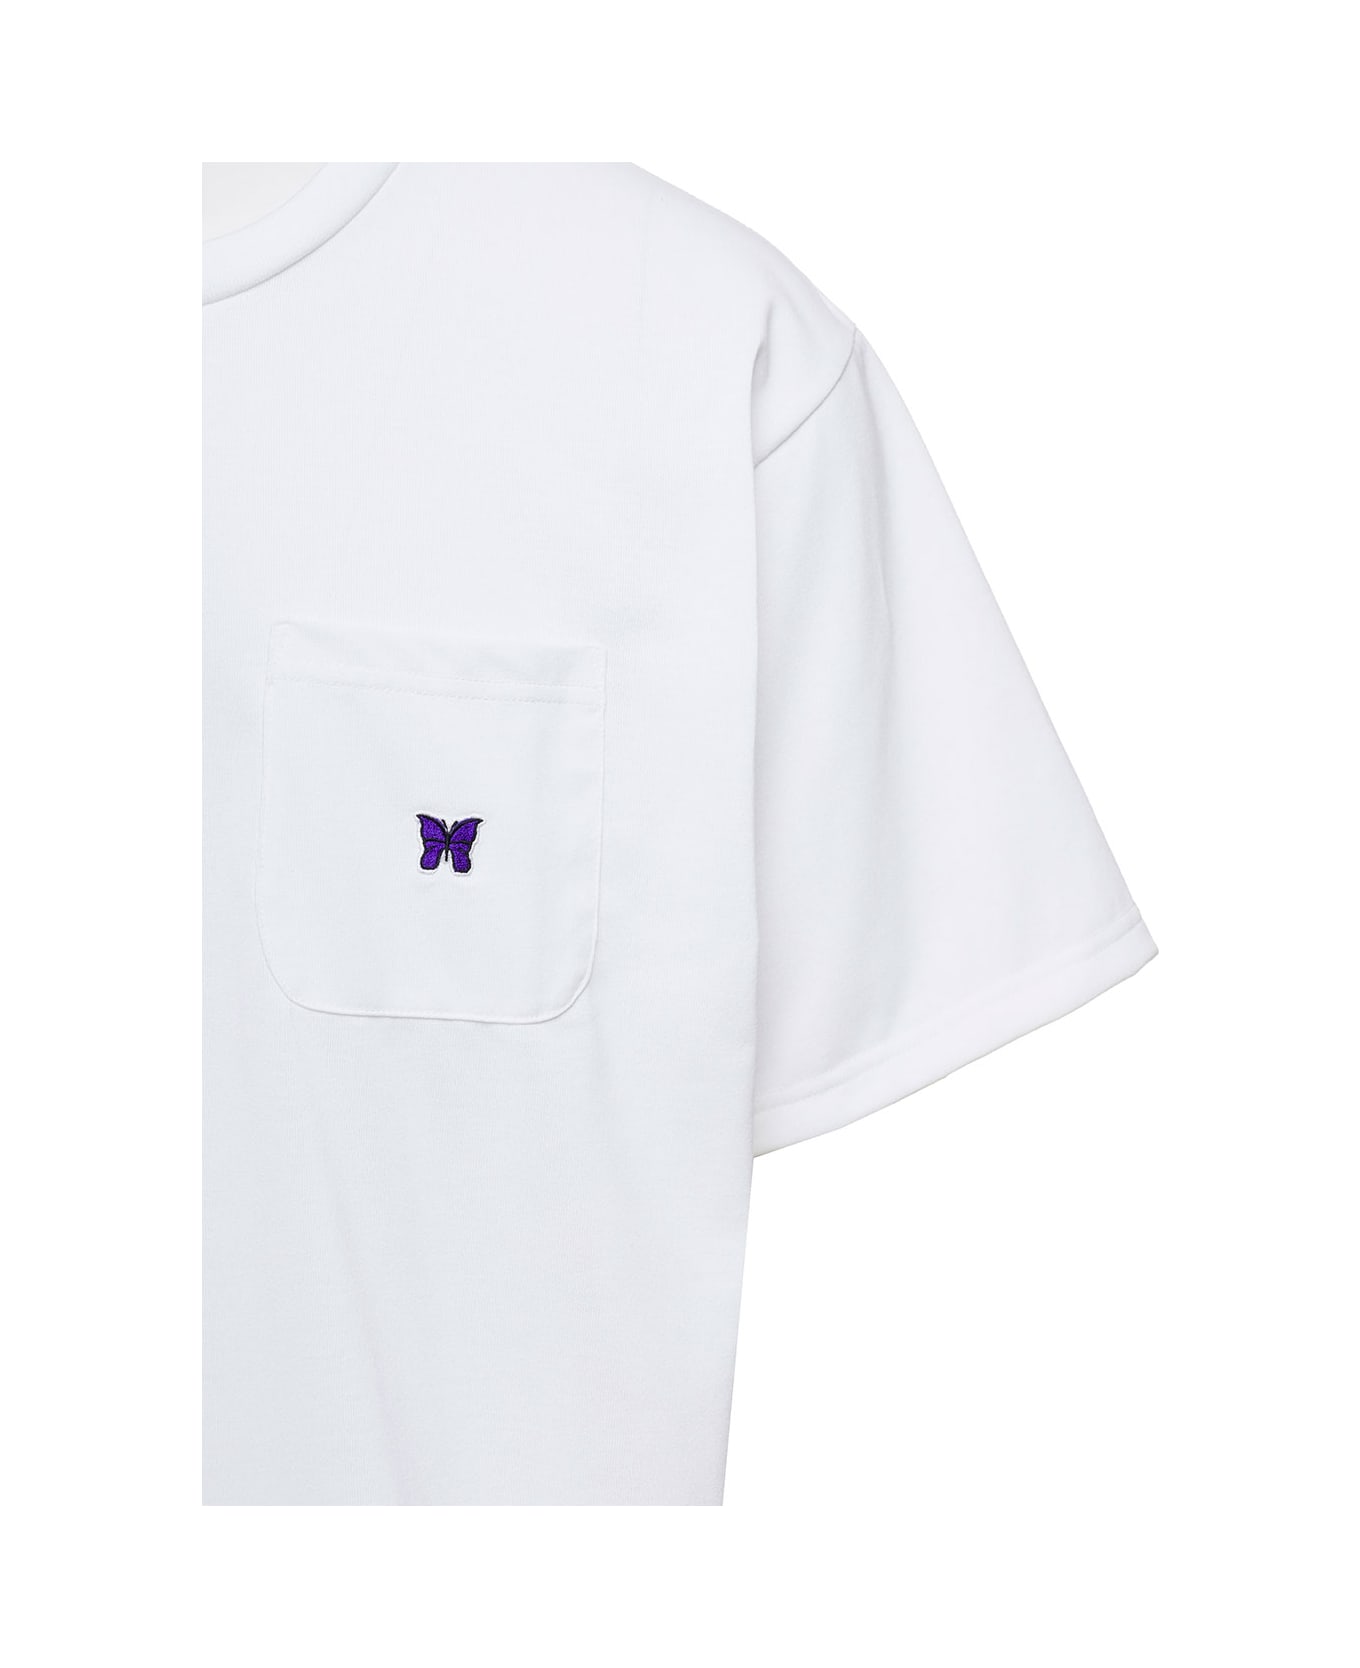 Needles Crewneck T-shirt With Front Pocket And Embroidered Logo In White Technical Fabric Man - White シャツ